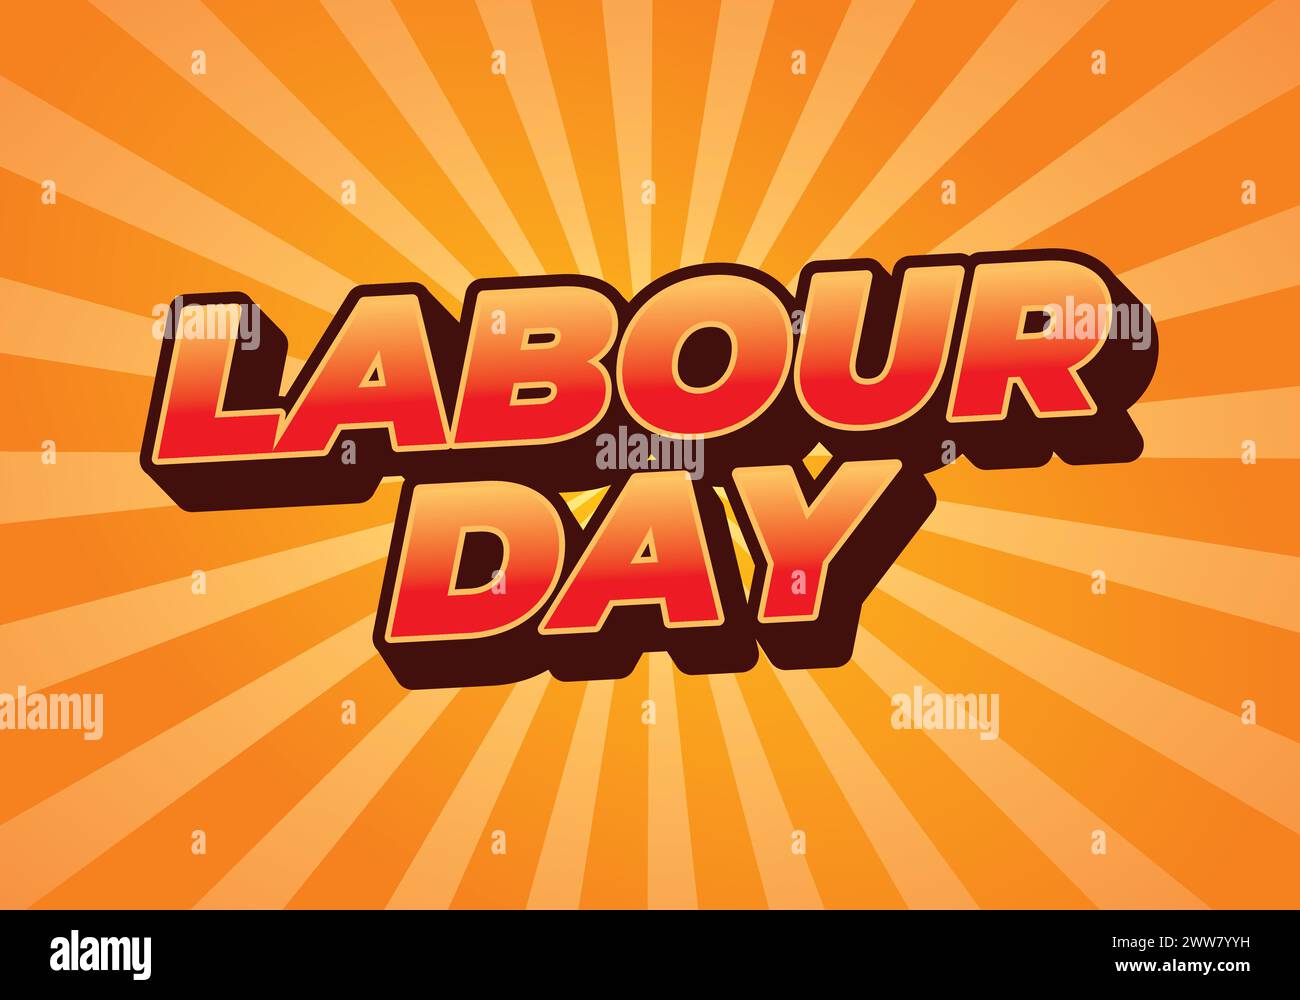 Labour day. Text effect design in red orange color with eye catching effect Stock Vector